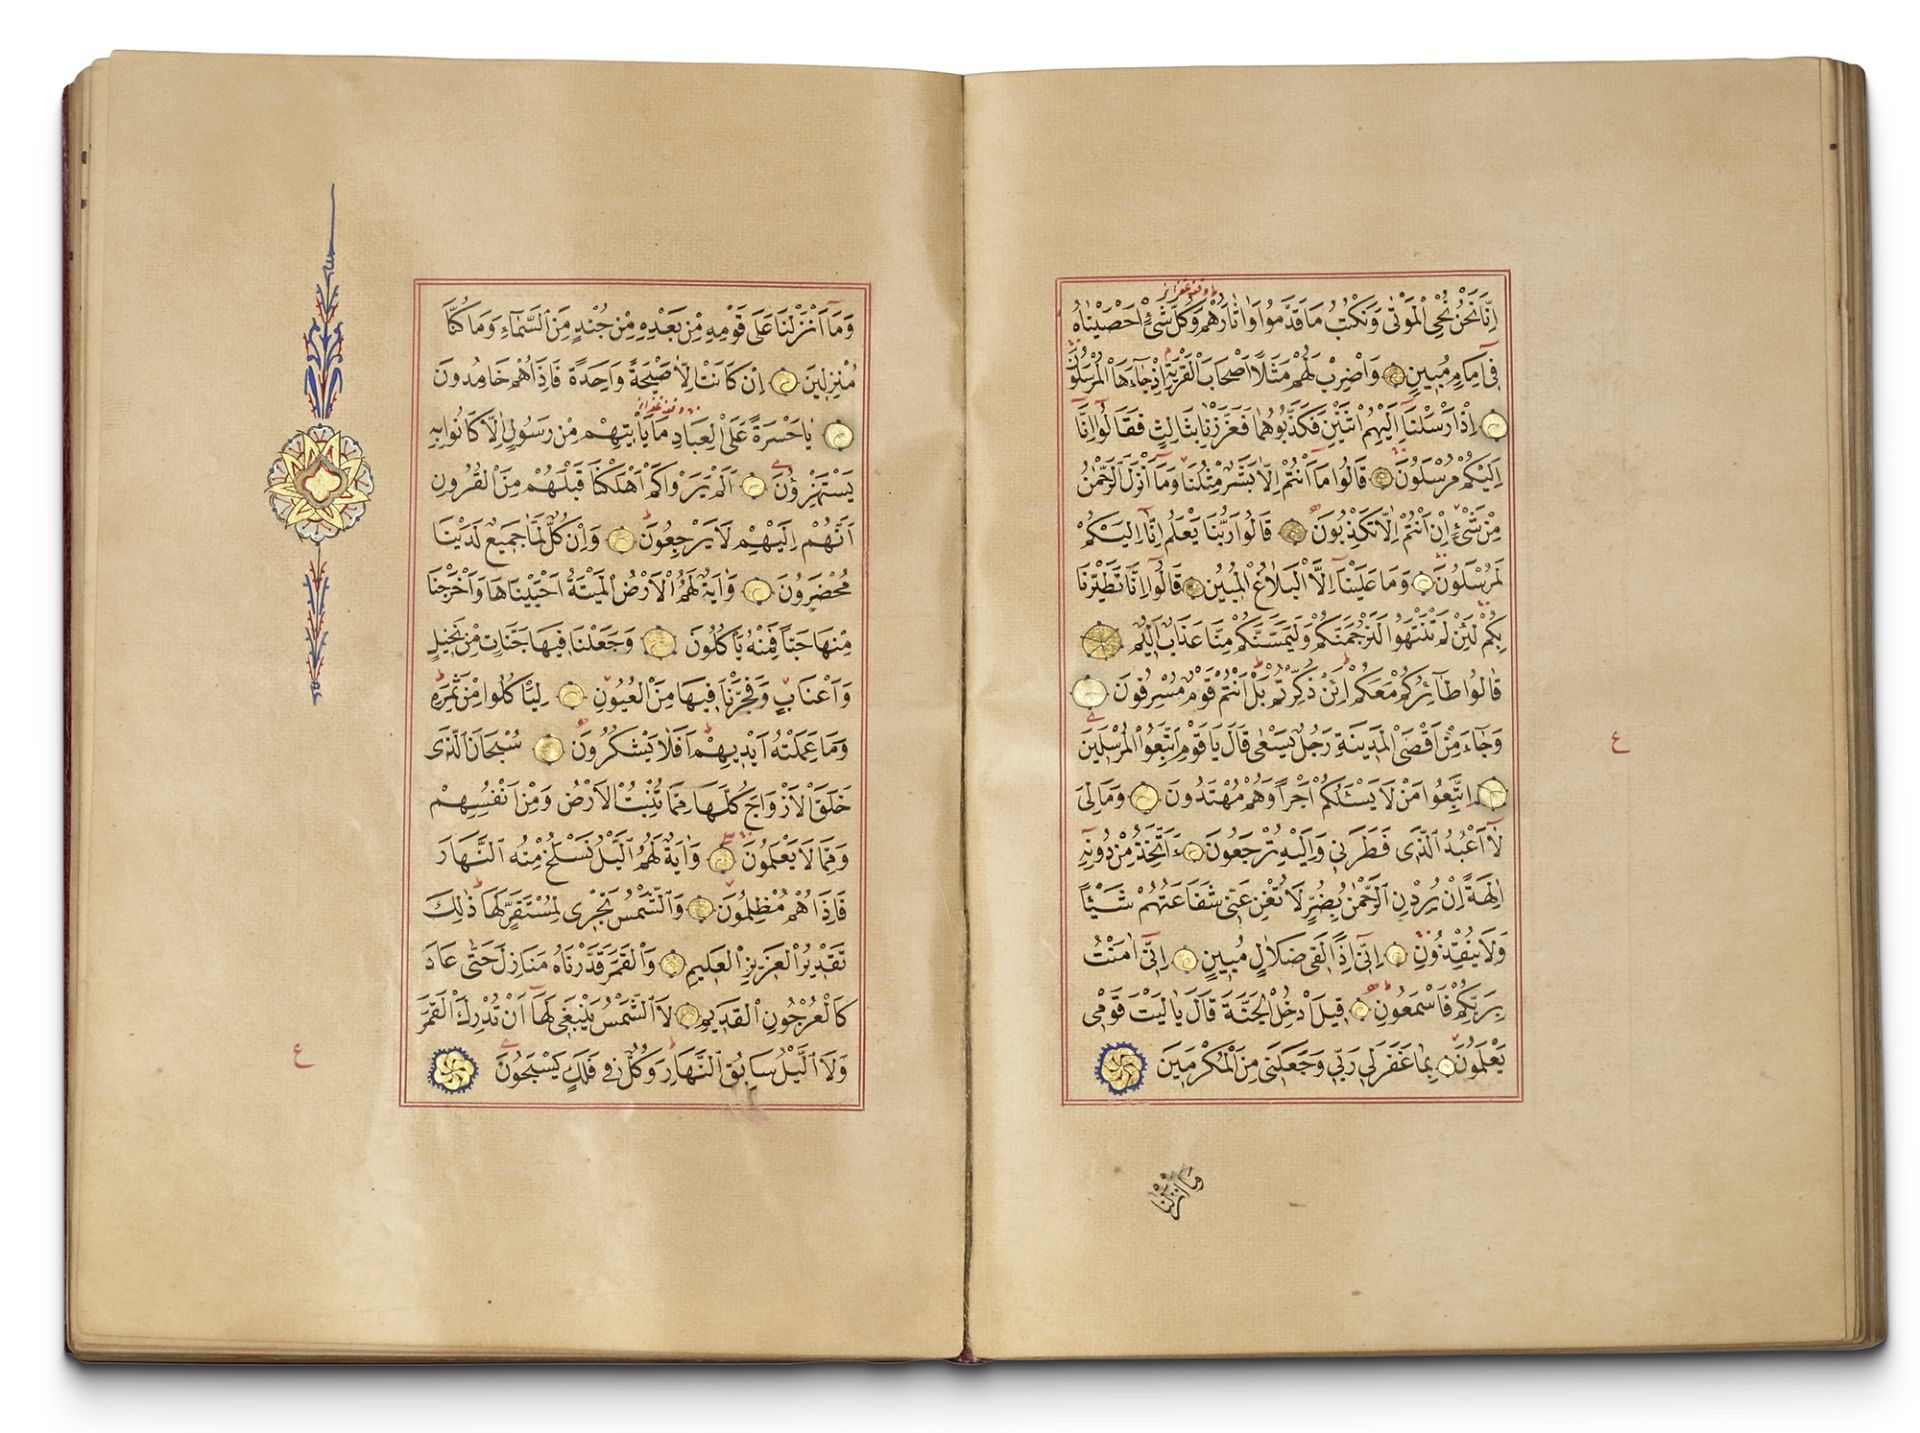 AN ILLUMINATED OTTOMAN QURAN, TURKEY WRITTEN BY HUSSAIN AL-RAJAI AND DATED 1286 AH/1869-70 AD - Image 3 of 4